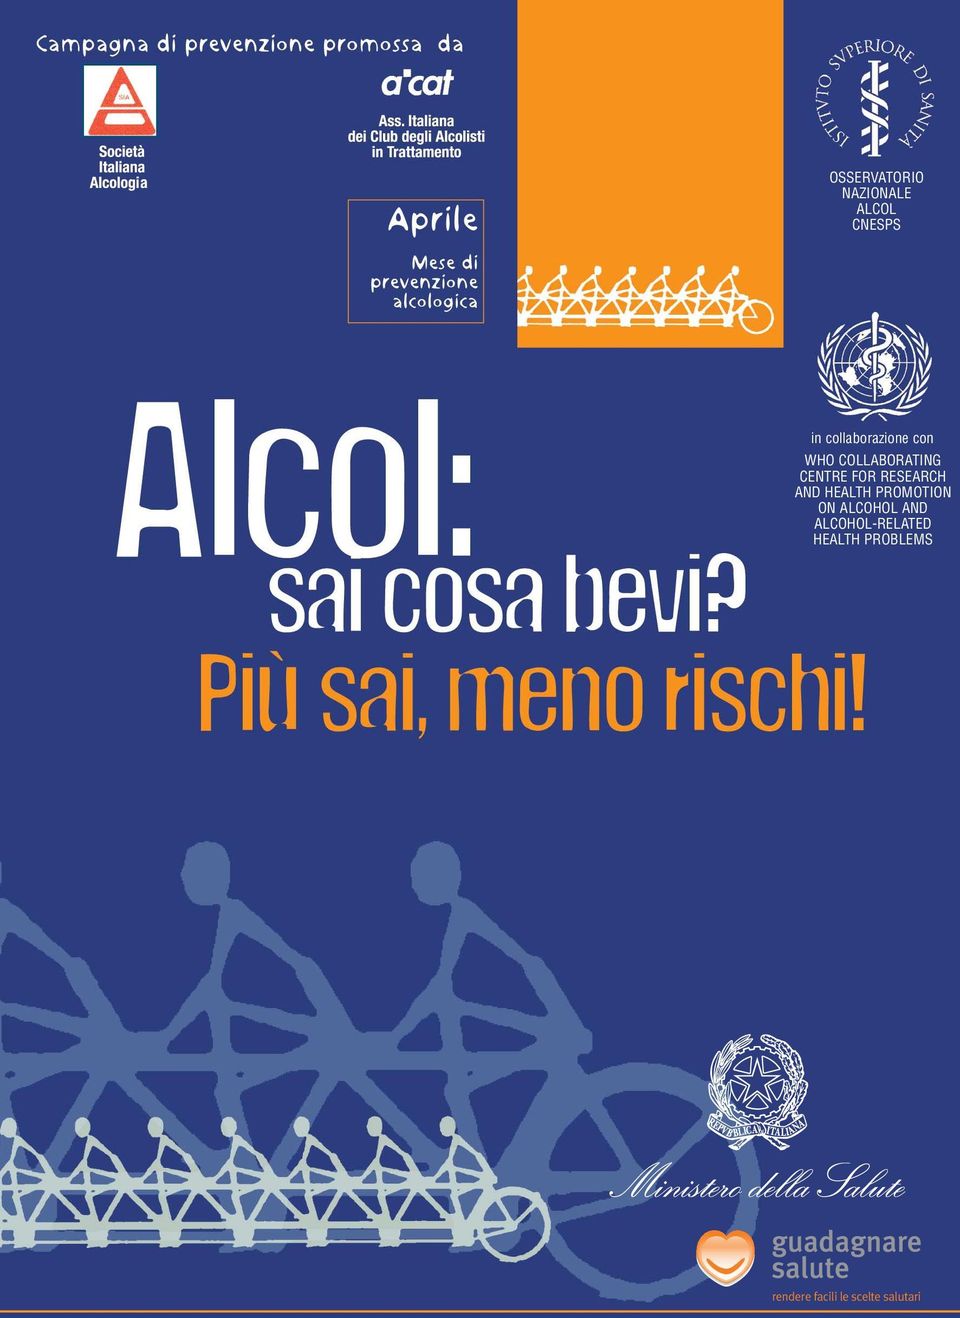 RESEARCH AND HEALTH PROMOTION ON ALCOHOL AND